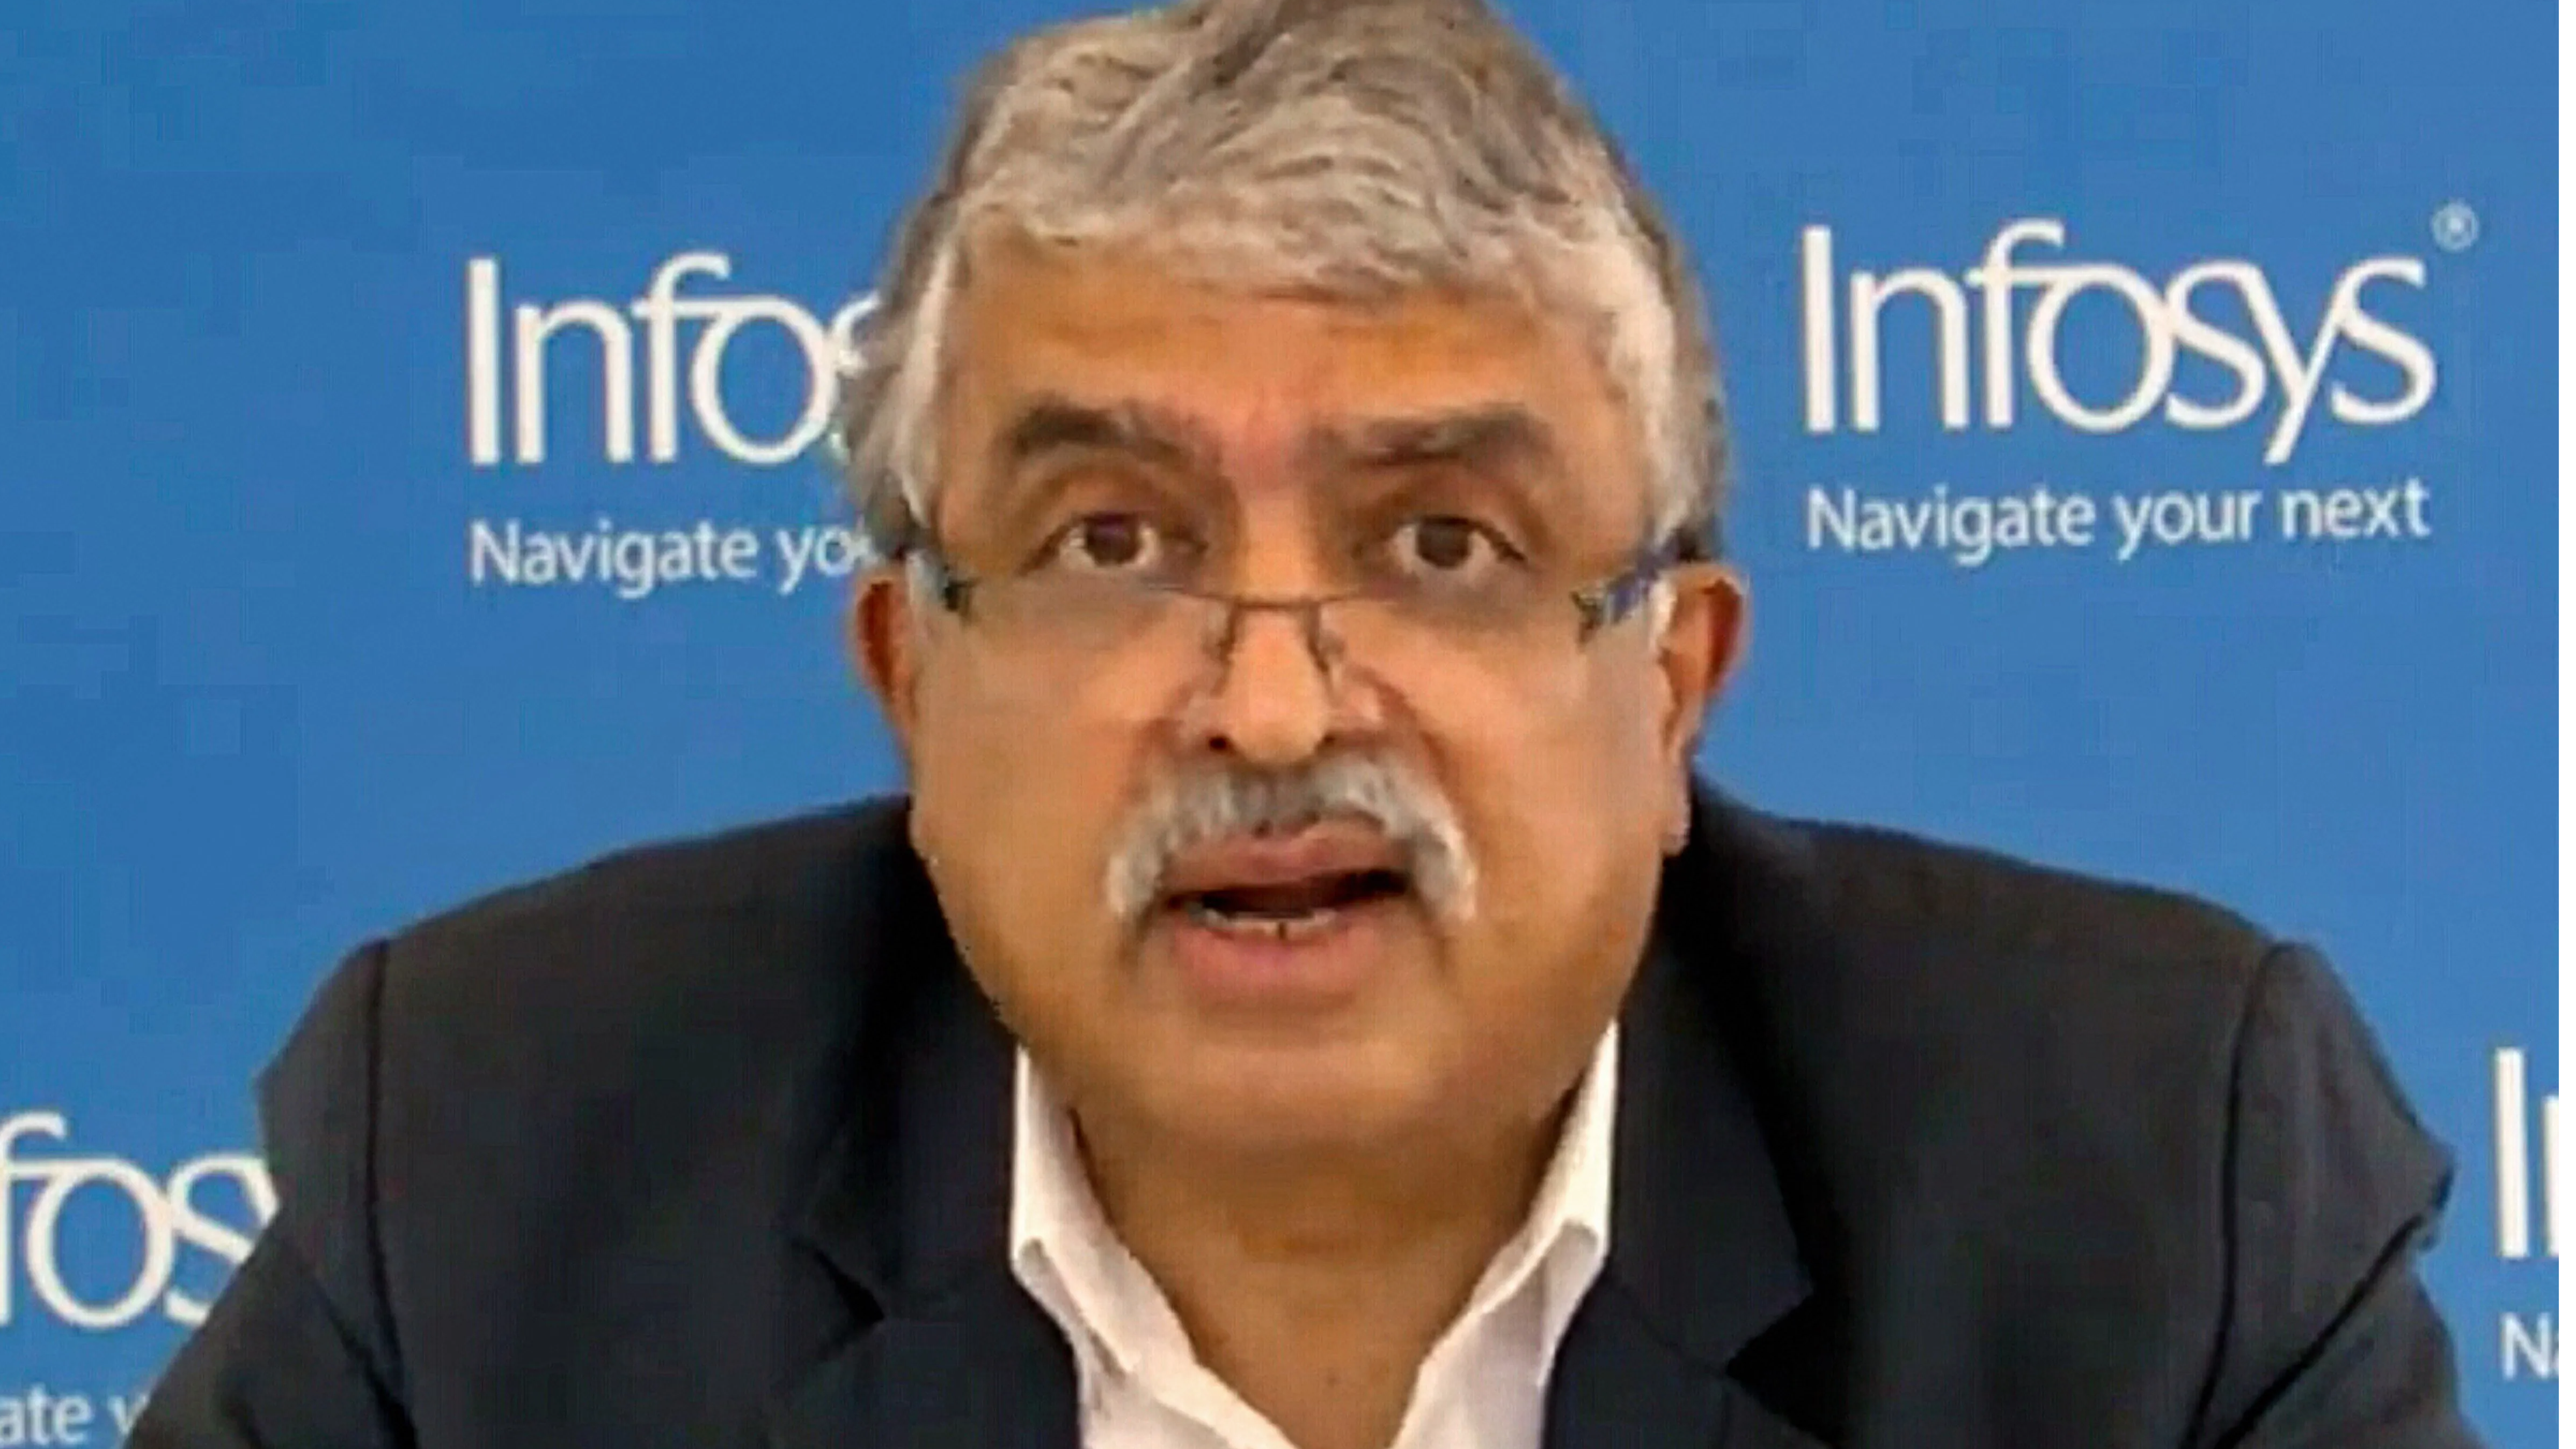 Infosys net profit rises by 17.5% to Rs 5,076 crore in the March quarter